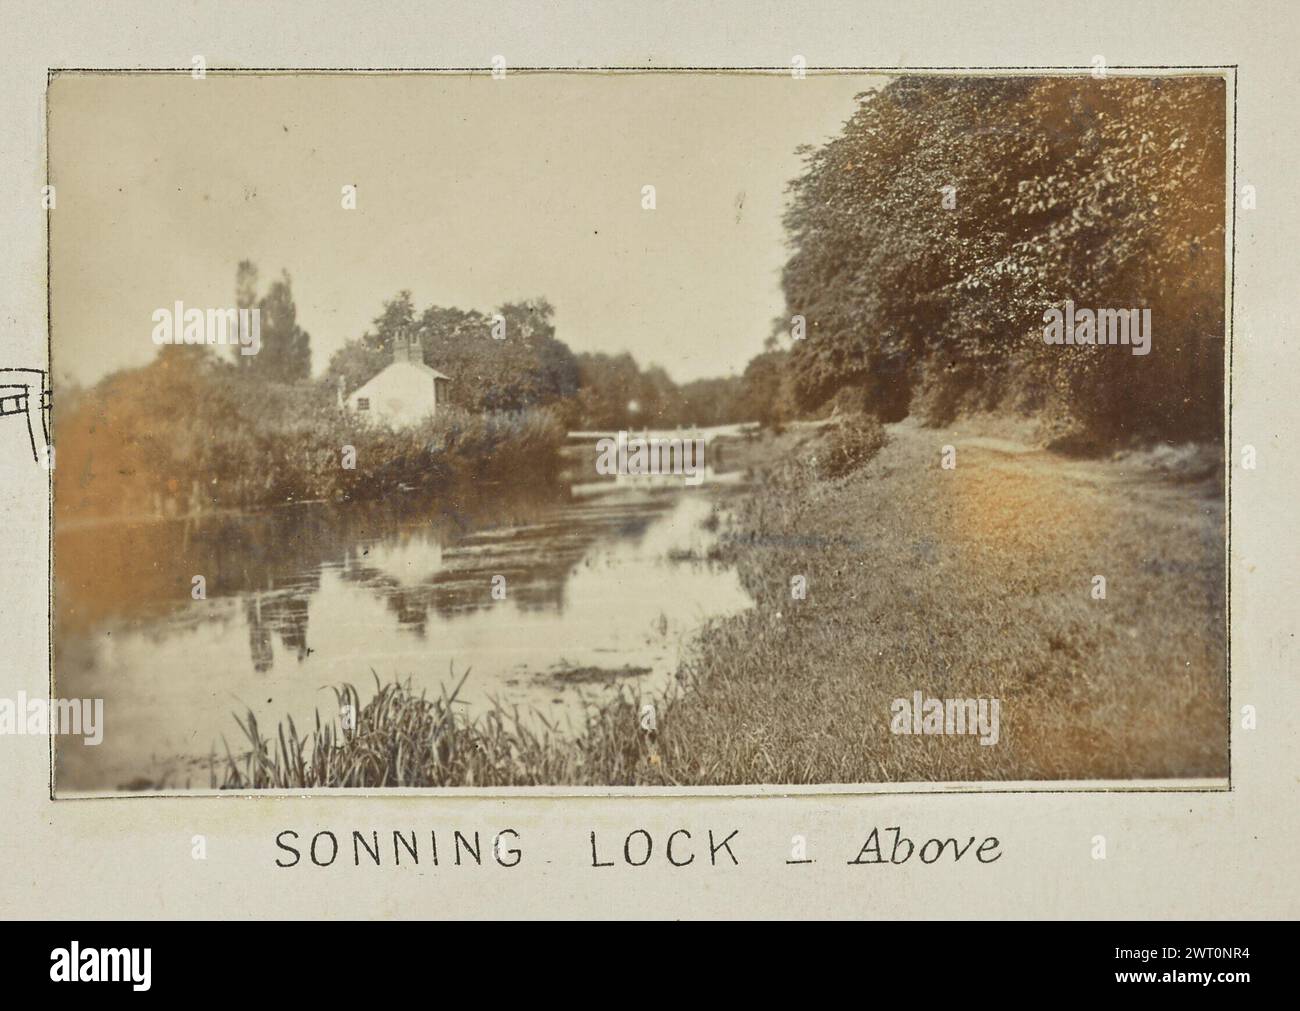 Sonning Lock - Above. Henry W. Taunt, photographer (British, 1842 - 1922) 1897 One of two tipped-in photographs illustrating a printed map of Sonning, Shiplake, and the surrounding area along the River Thames. The photograph shows a view of the river with the Sonning Lock visible in the distance downriver. The lock cottage sits on the riverbank on the left side of the image. (Recto, mount) lower center, below image, printed in black ink: 'SONNING LOCK - Above [italicized]' Stock Photo